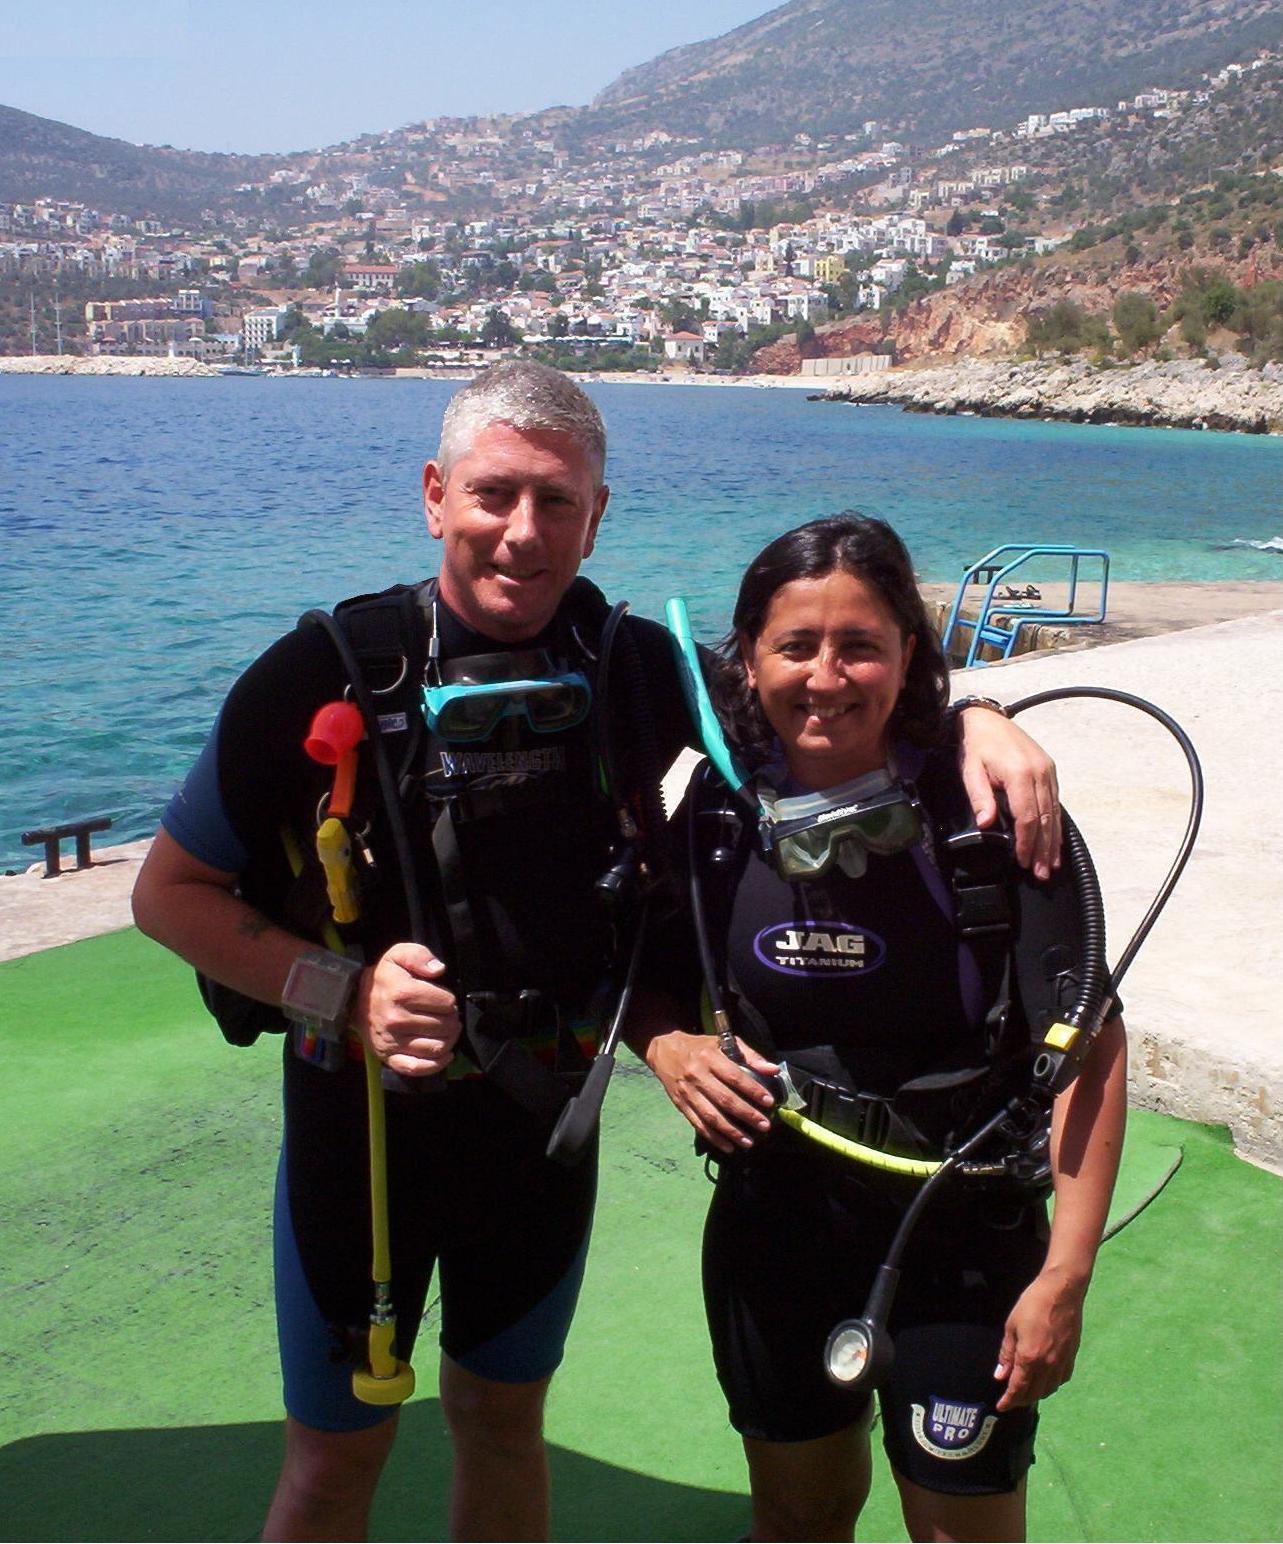 Wife and i on her birthday in Kalkan.